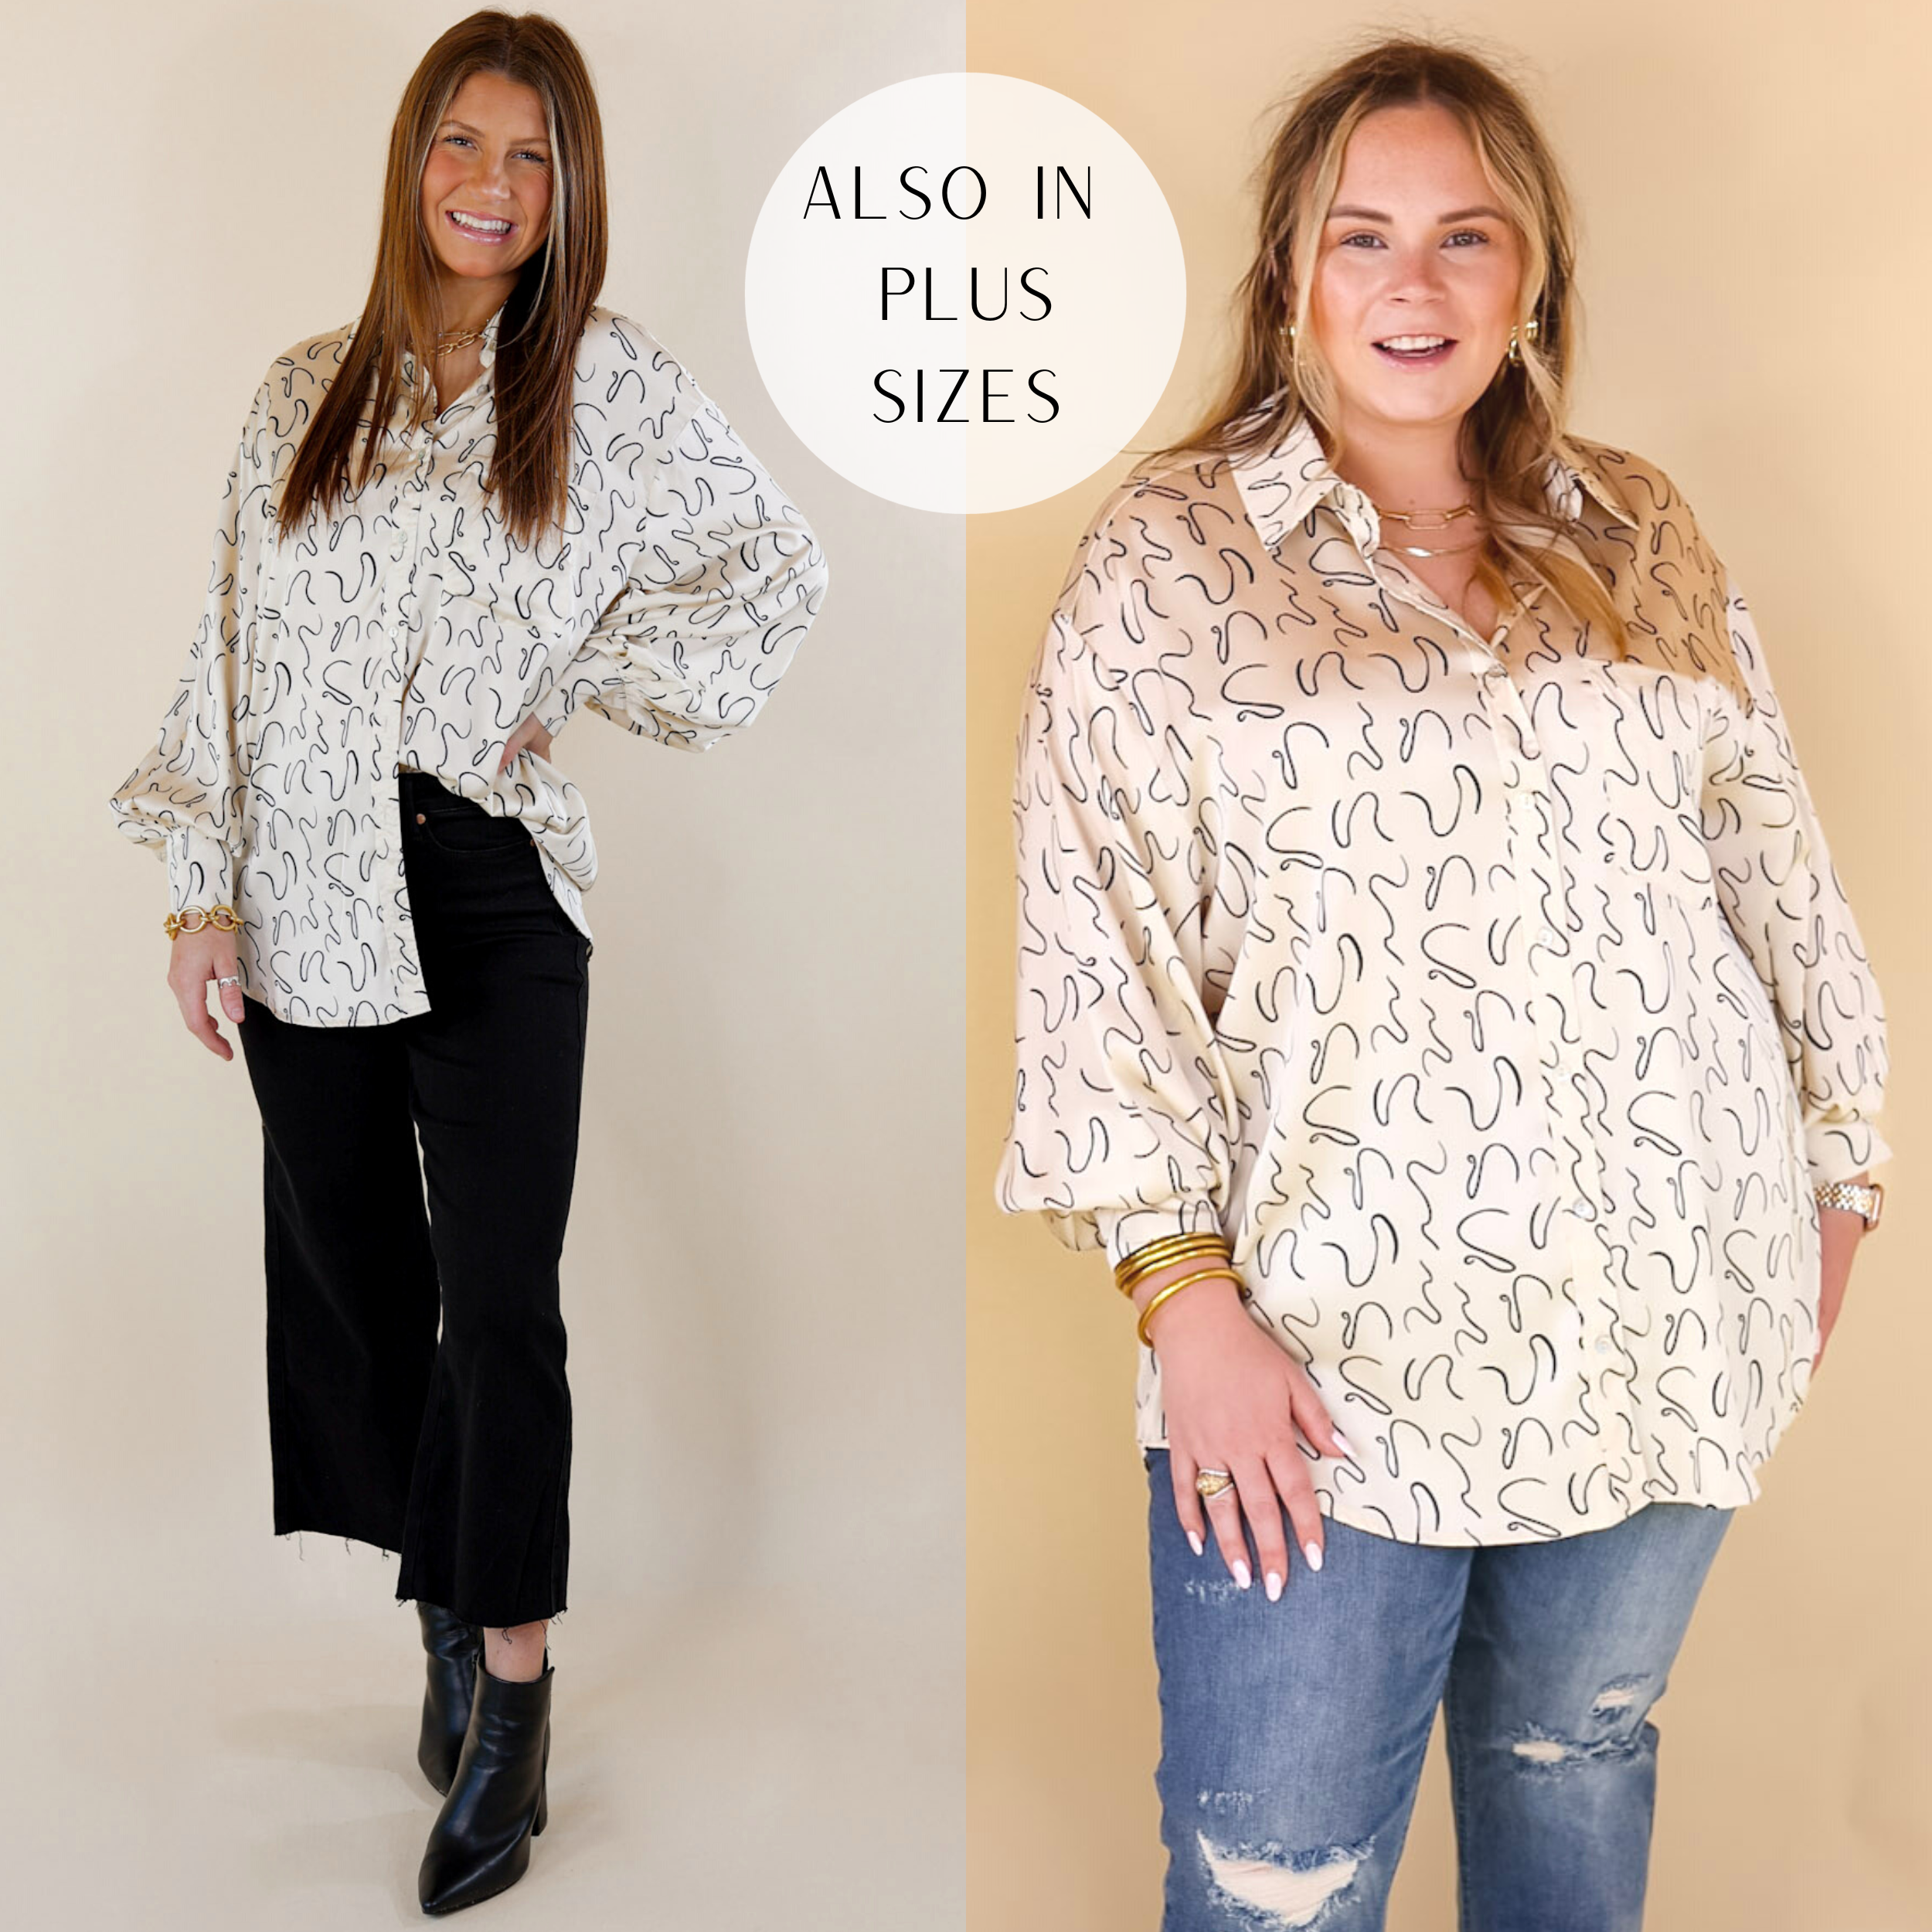 Model is wearing a satin button up top with long sleeves, a collared neckline, and a black swirl print. Model has this top paired with distressed jeans, tan wedges, and gold jewelry.